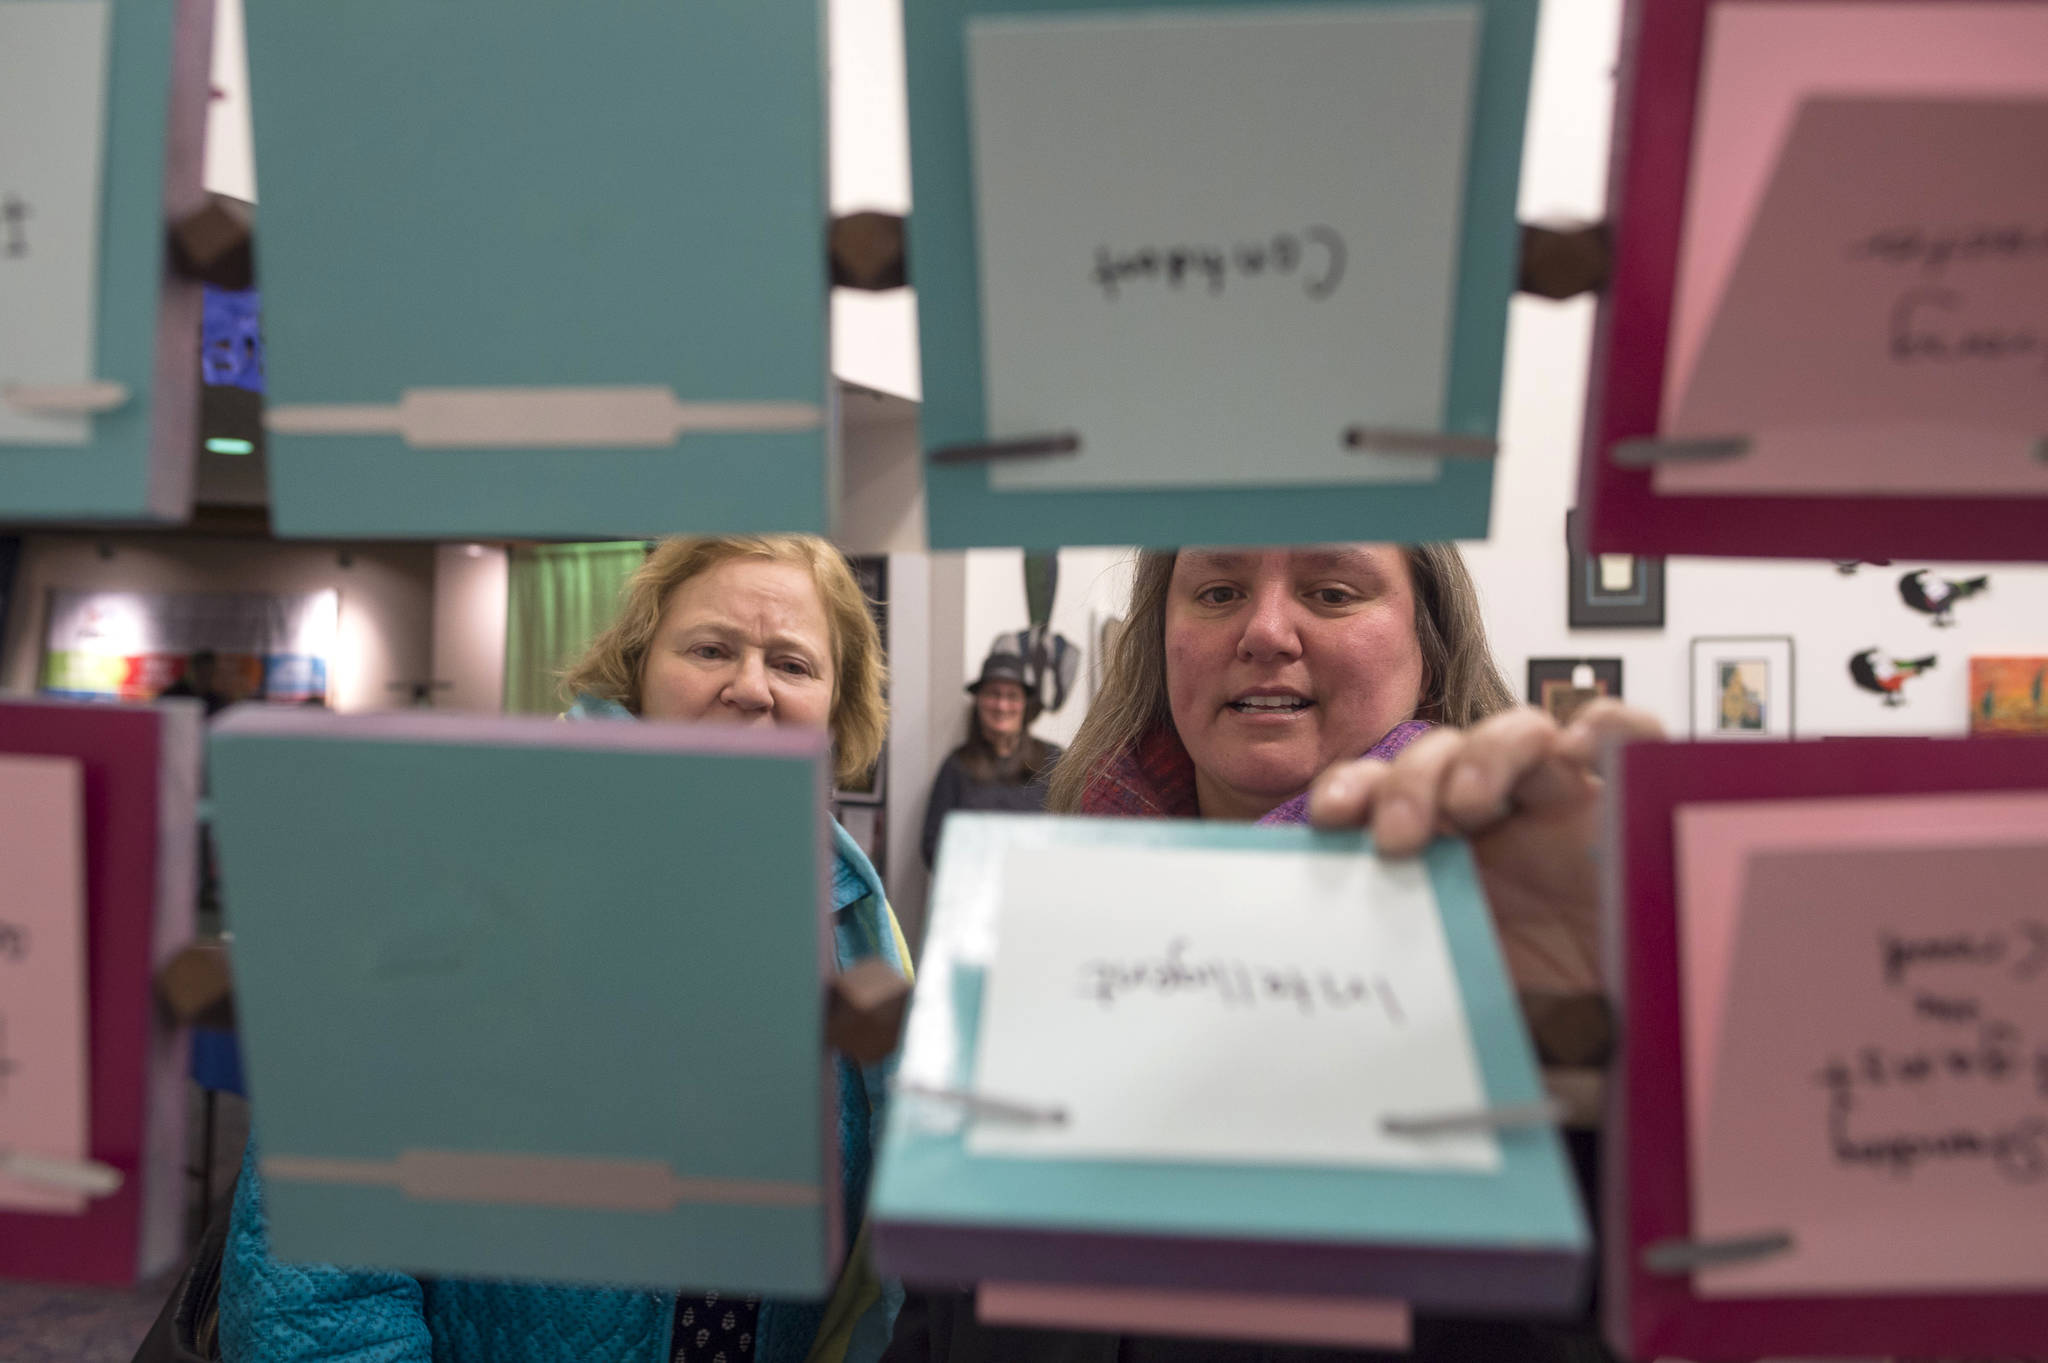 Cathy Needham, right, and Barb Sheinberg check out the “The Rolodex Project//On Leadership” by artist Sarah Campen, an interactive film and sculpture on display at The Davis Gallery in Centennial Hall during Gallery Walk on Friday, Dec. 7, 2018. (Michael Penn | Juneau Empire)